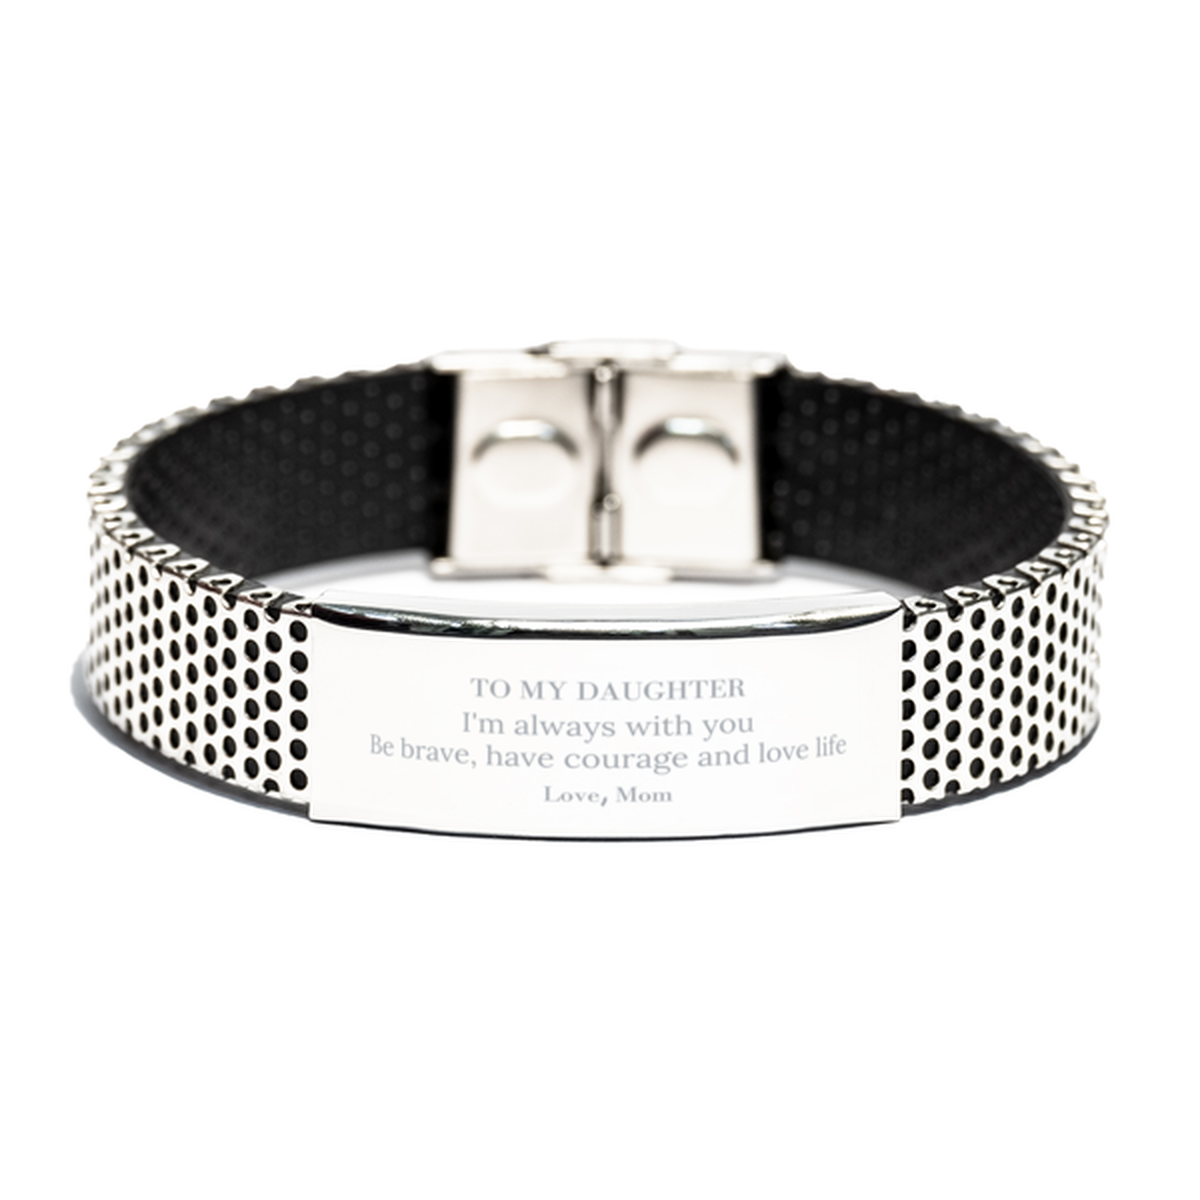 To My Daughter Gifts from Mom, Unique Stainless Steel Bracelet Inspirational Christmas Birthday Graduation Gifts for Daughter I'm always with you. Be brave, have courage and love life. Love, Mom